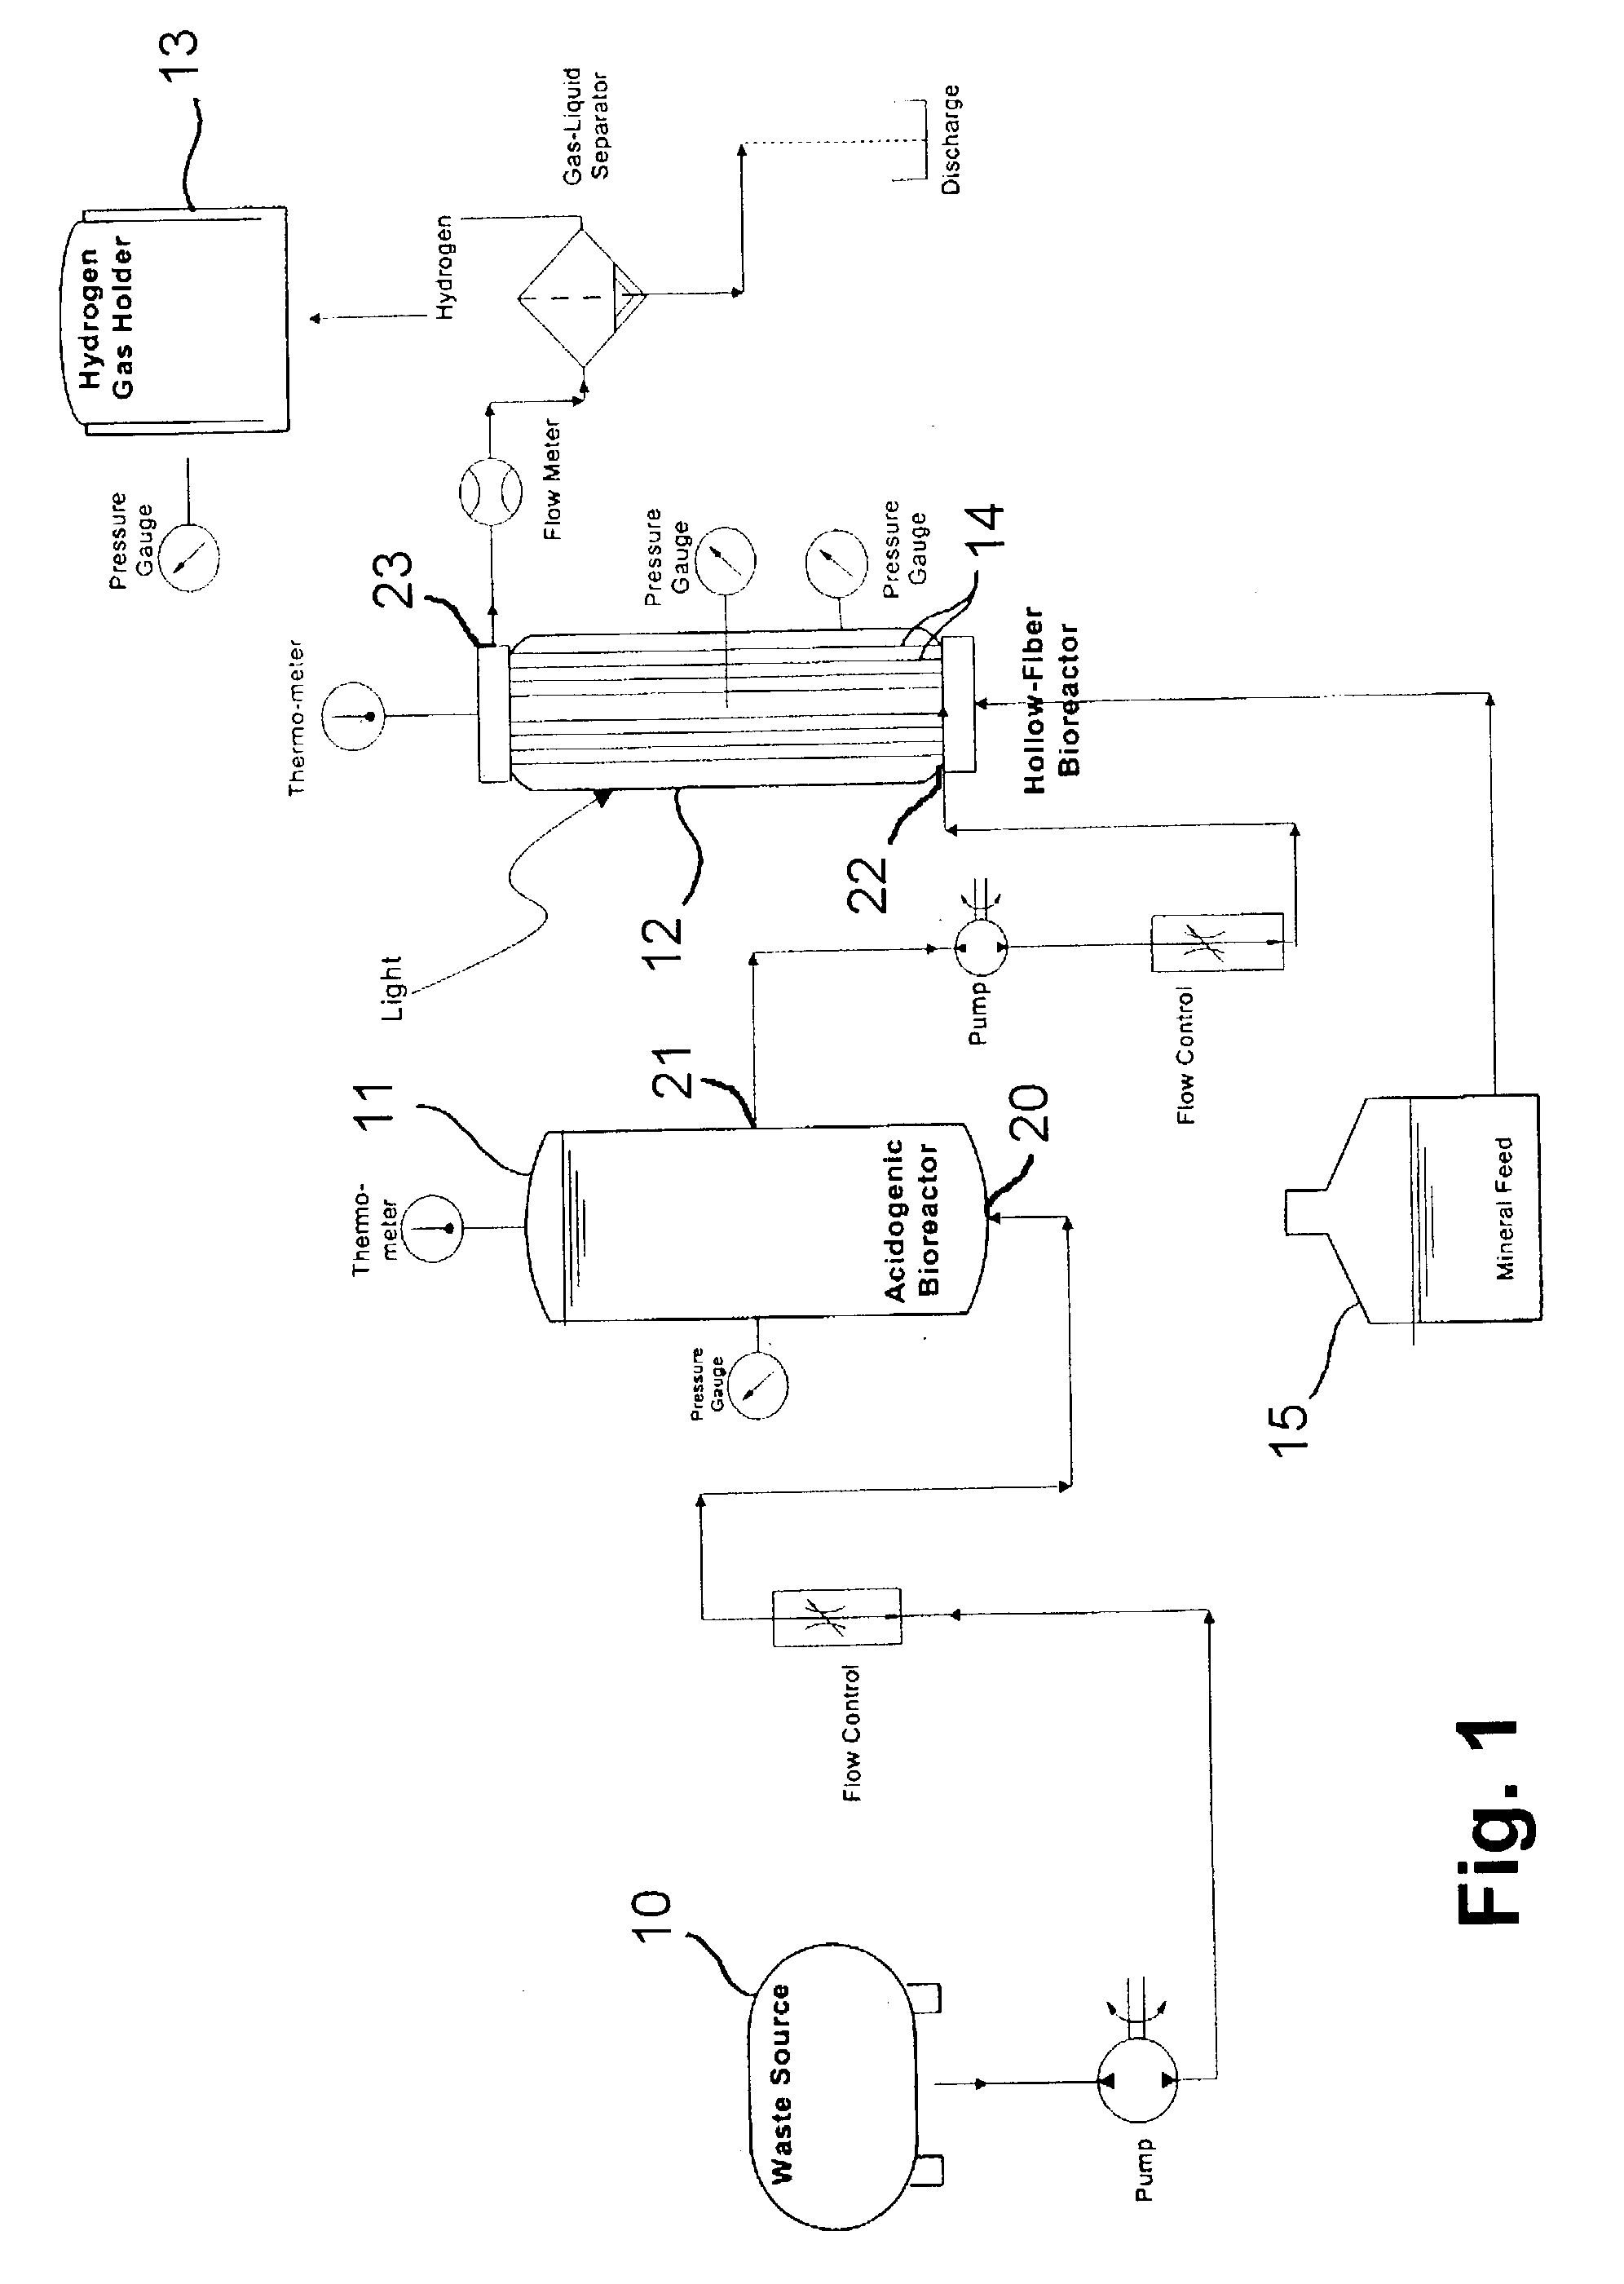 Method and apparatus for hydrogen production from organic wastes and manure